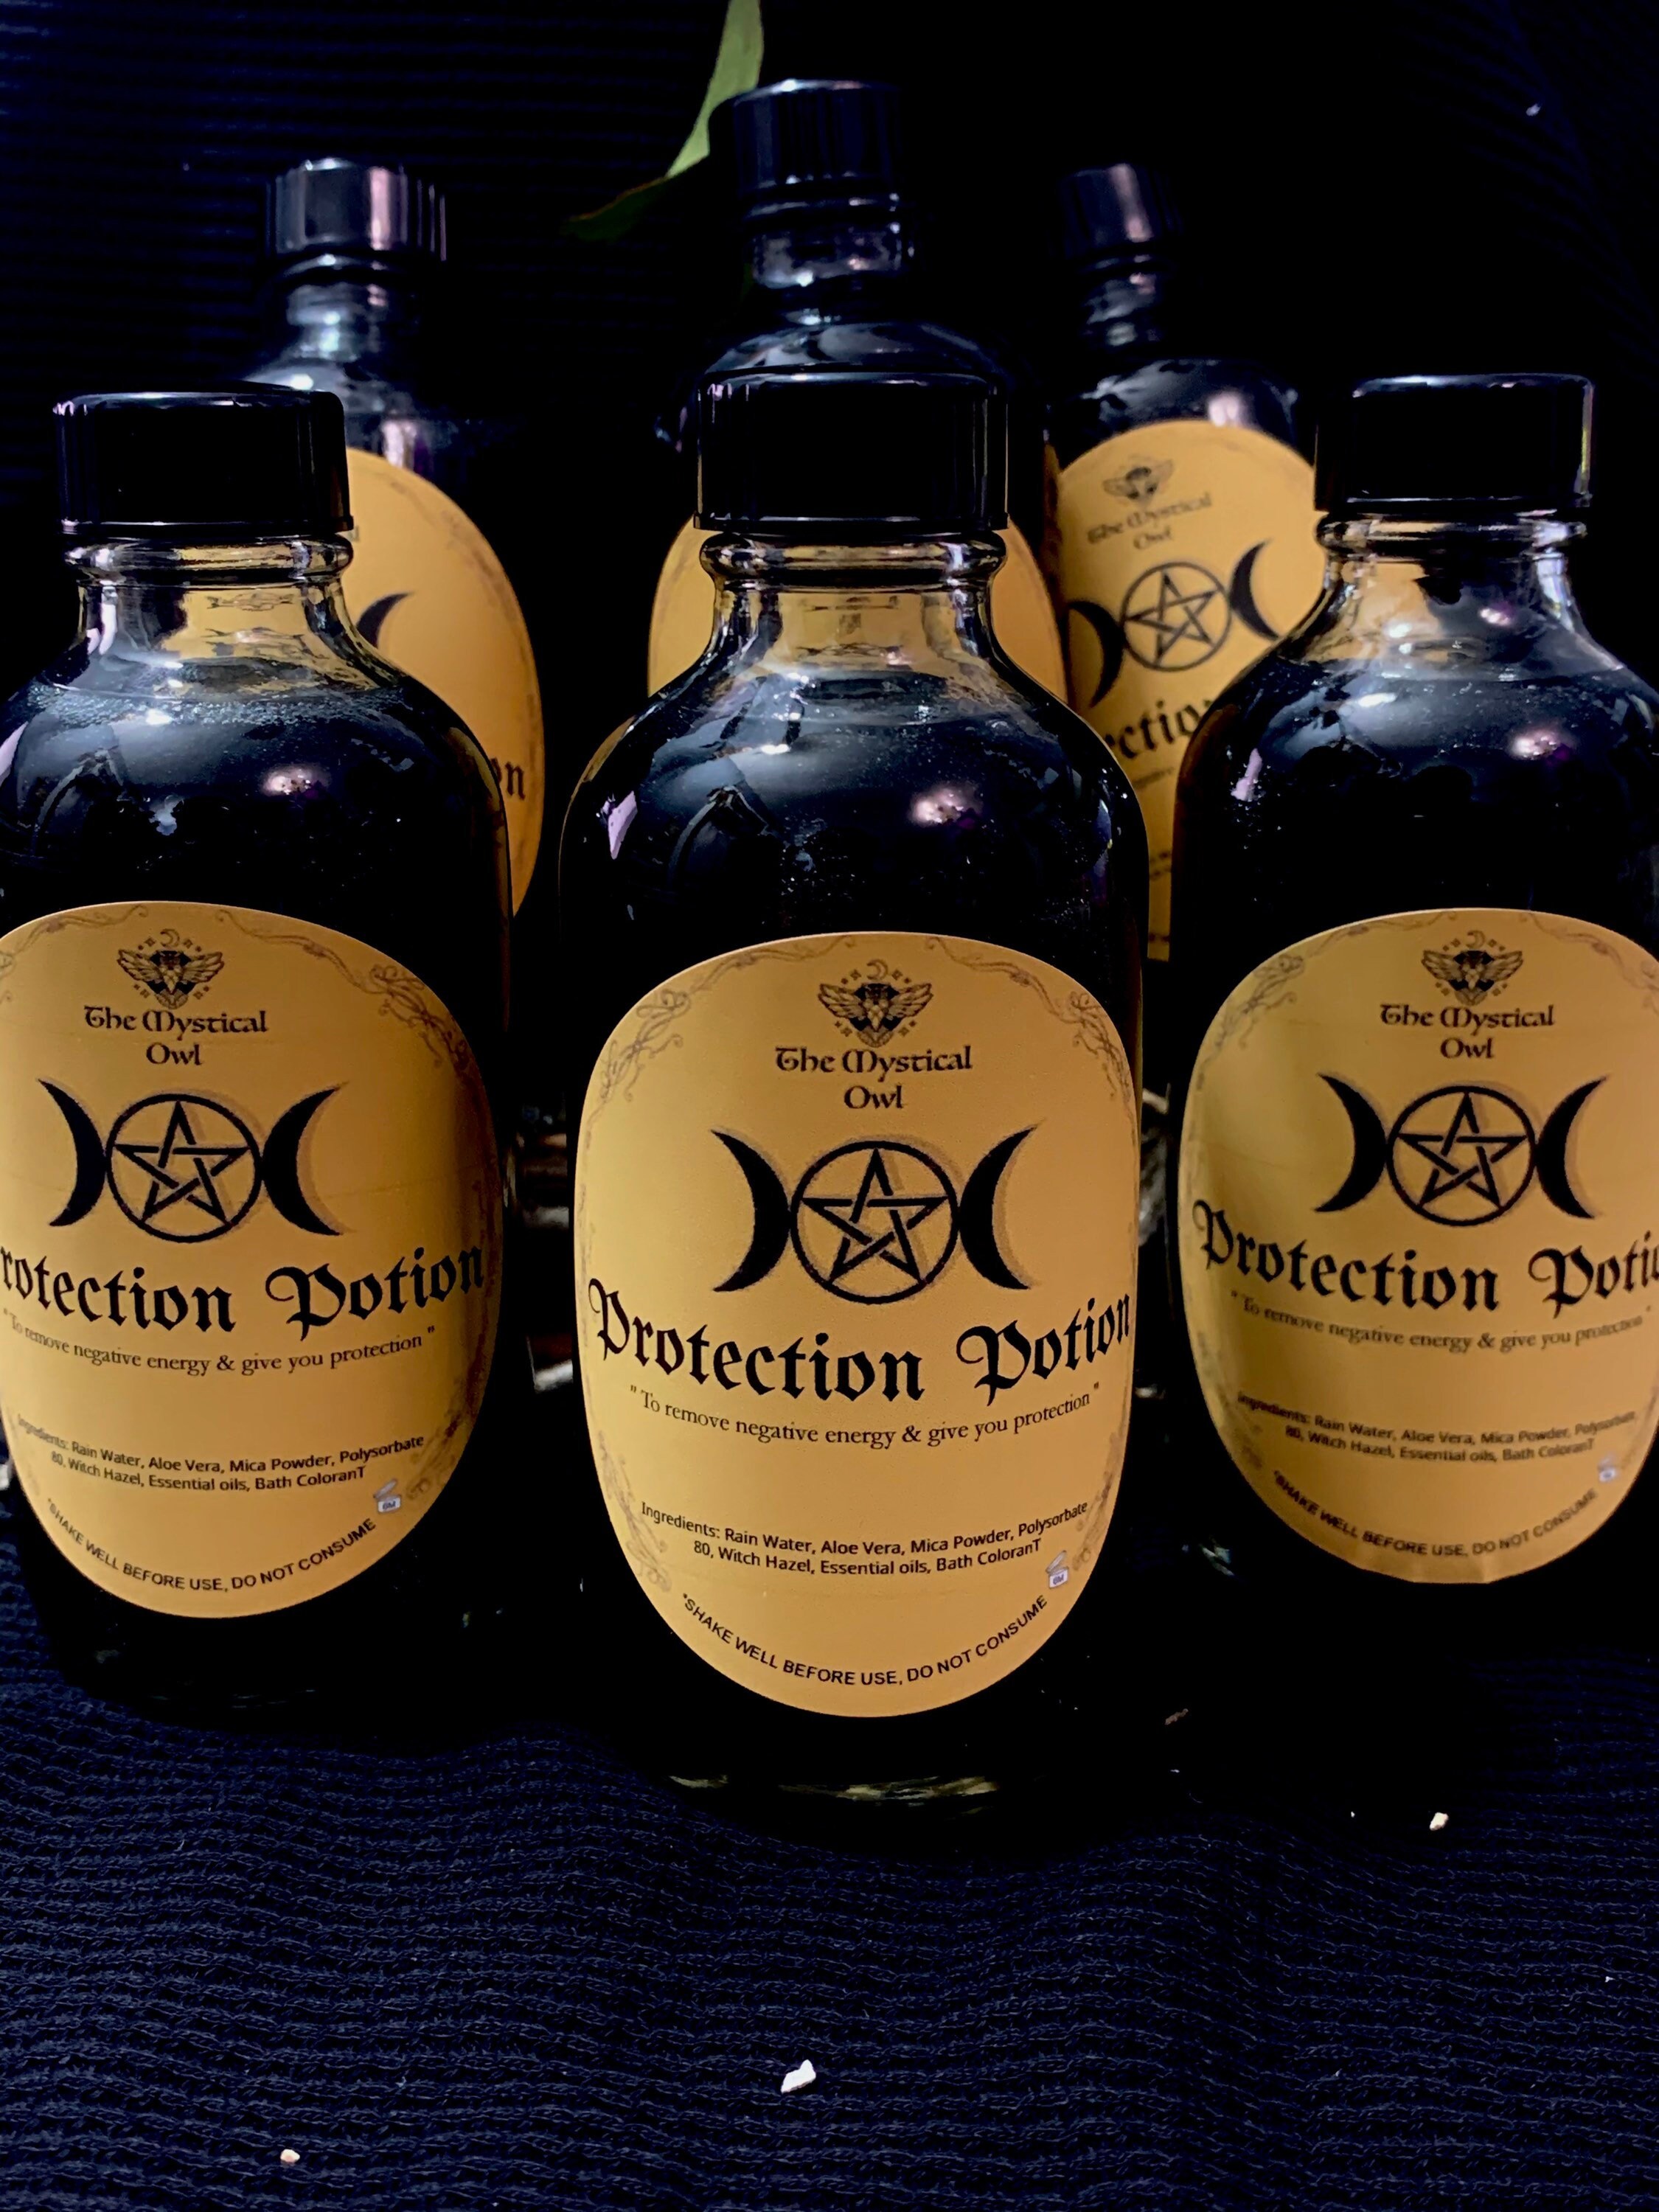 Protection Potion - Potion to protect yourself or others - spell witch - Wicca - herb - moon - black